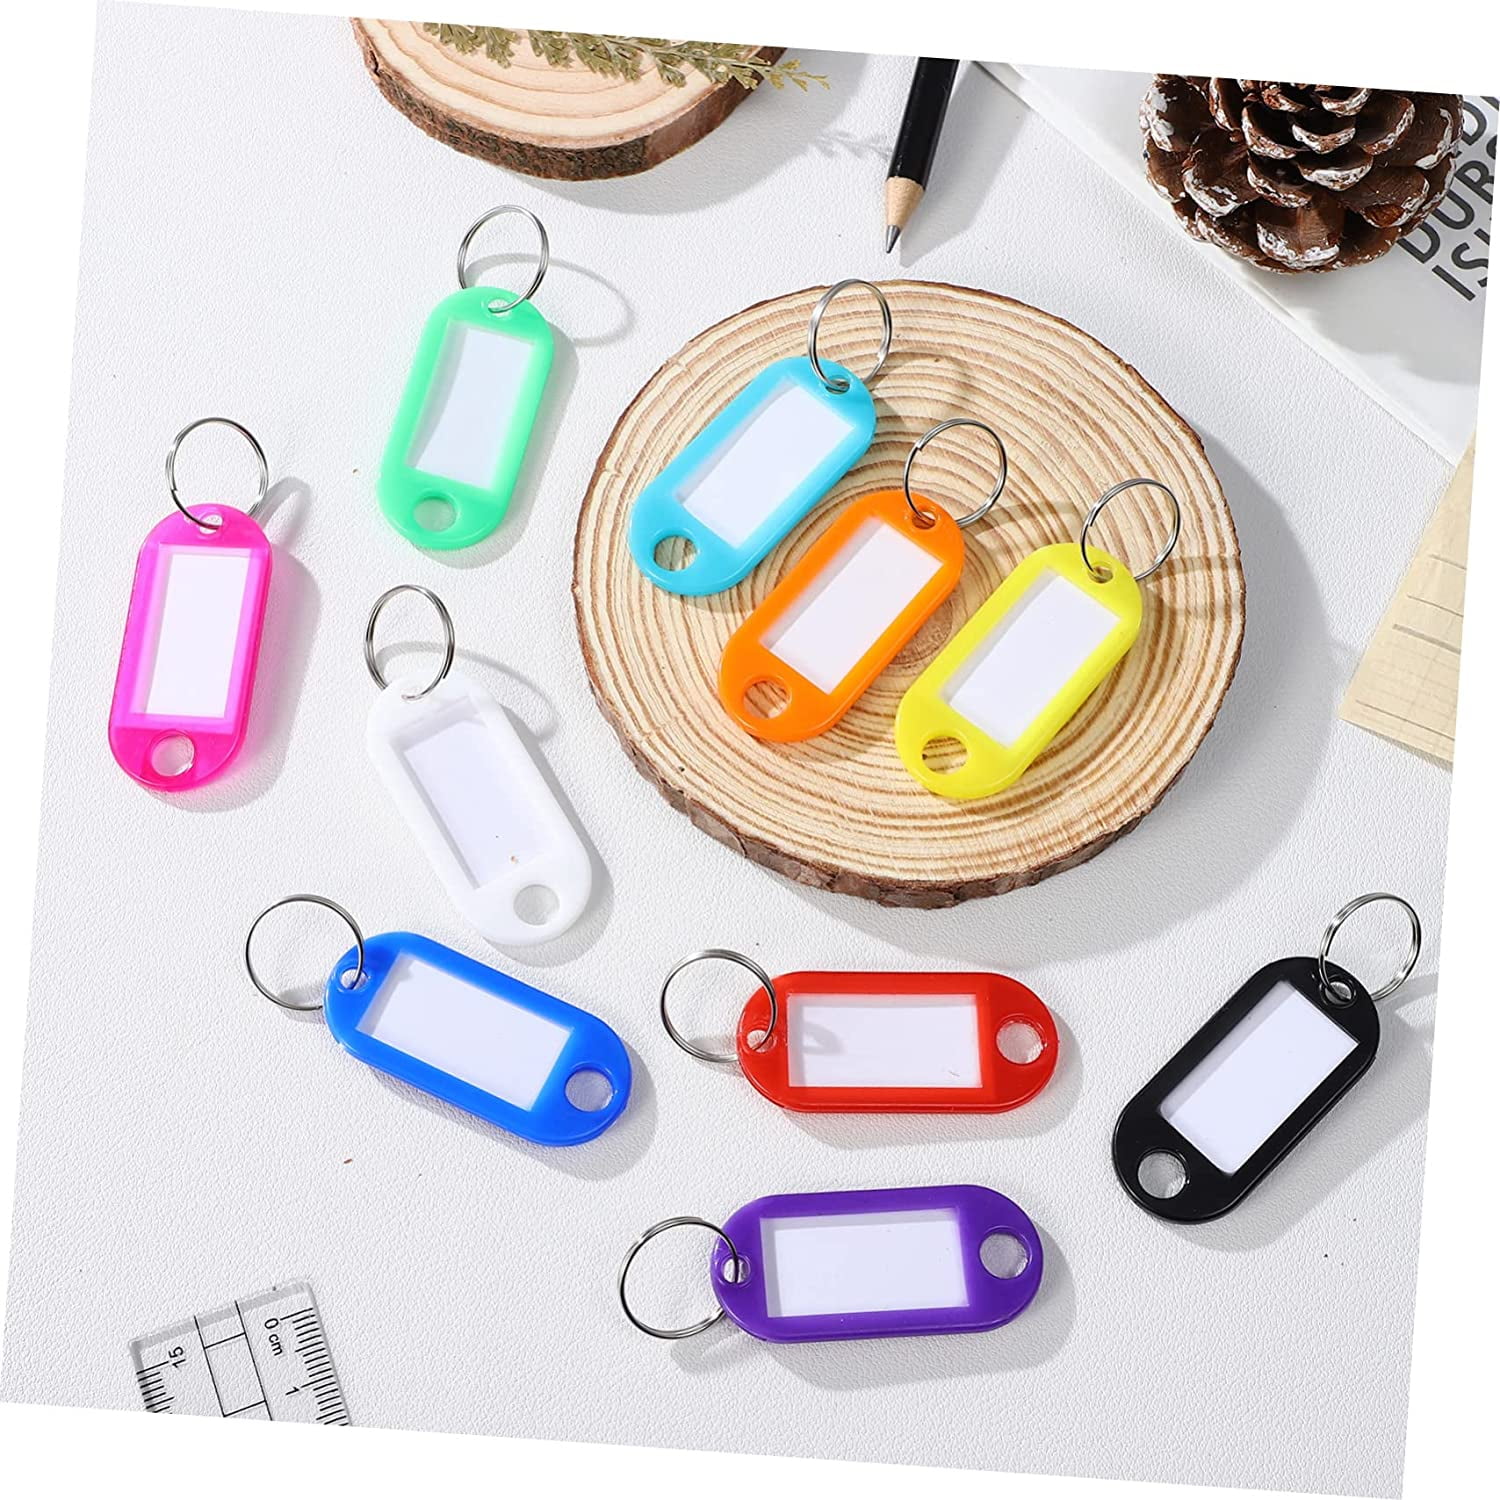 WFPOWER Car Key Tags, 300pcs Car Dealer Key Tags with Rings and 2 Fine Point Pens, Plastic Key Tags with Labels, Dealer Key Ring Tag Identifiers